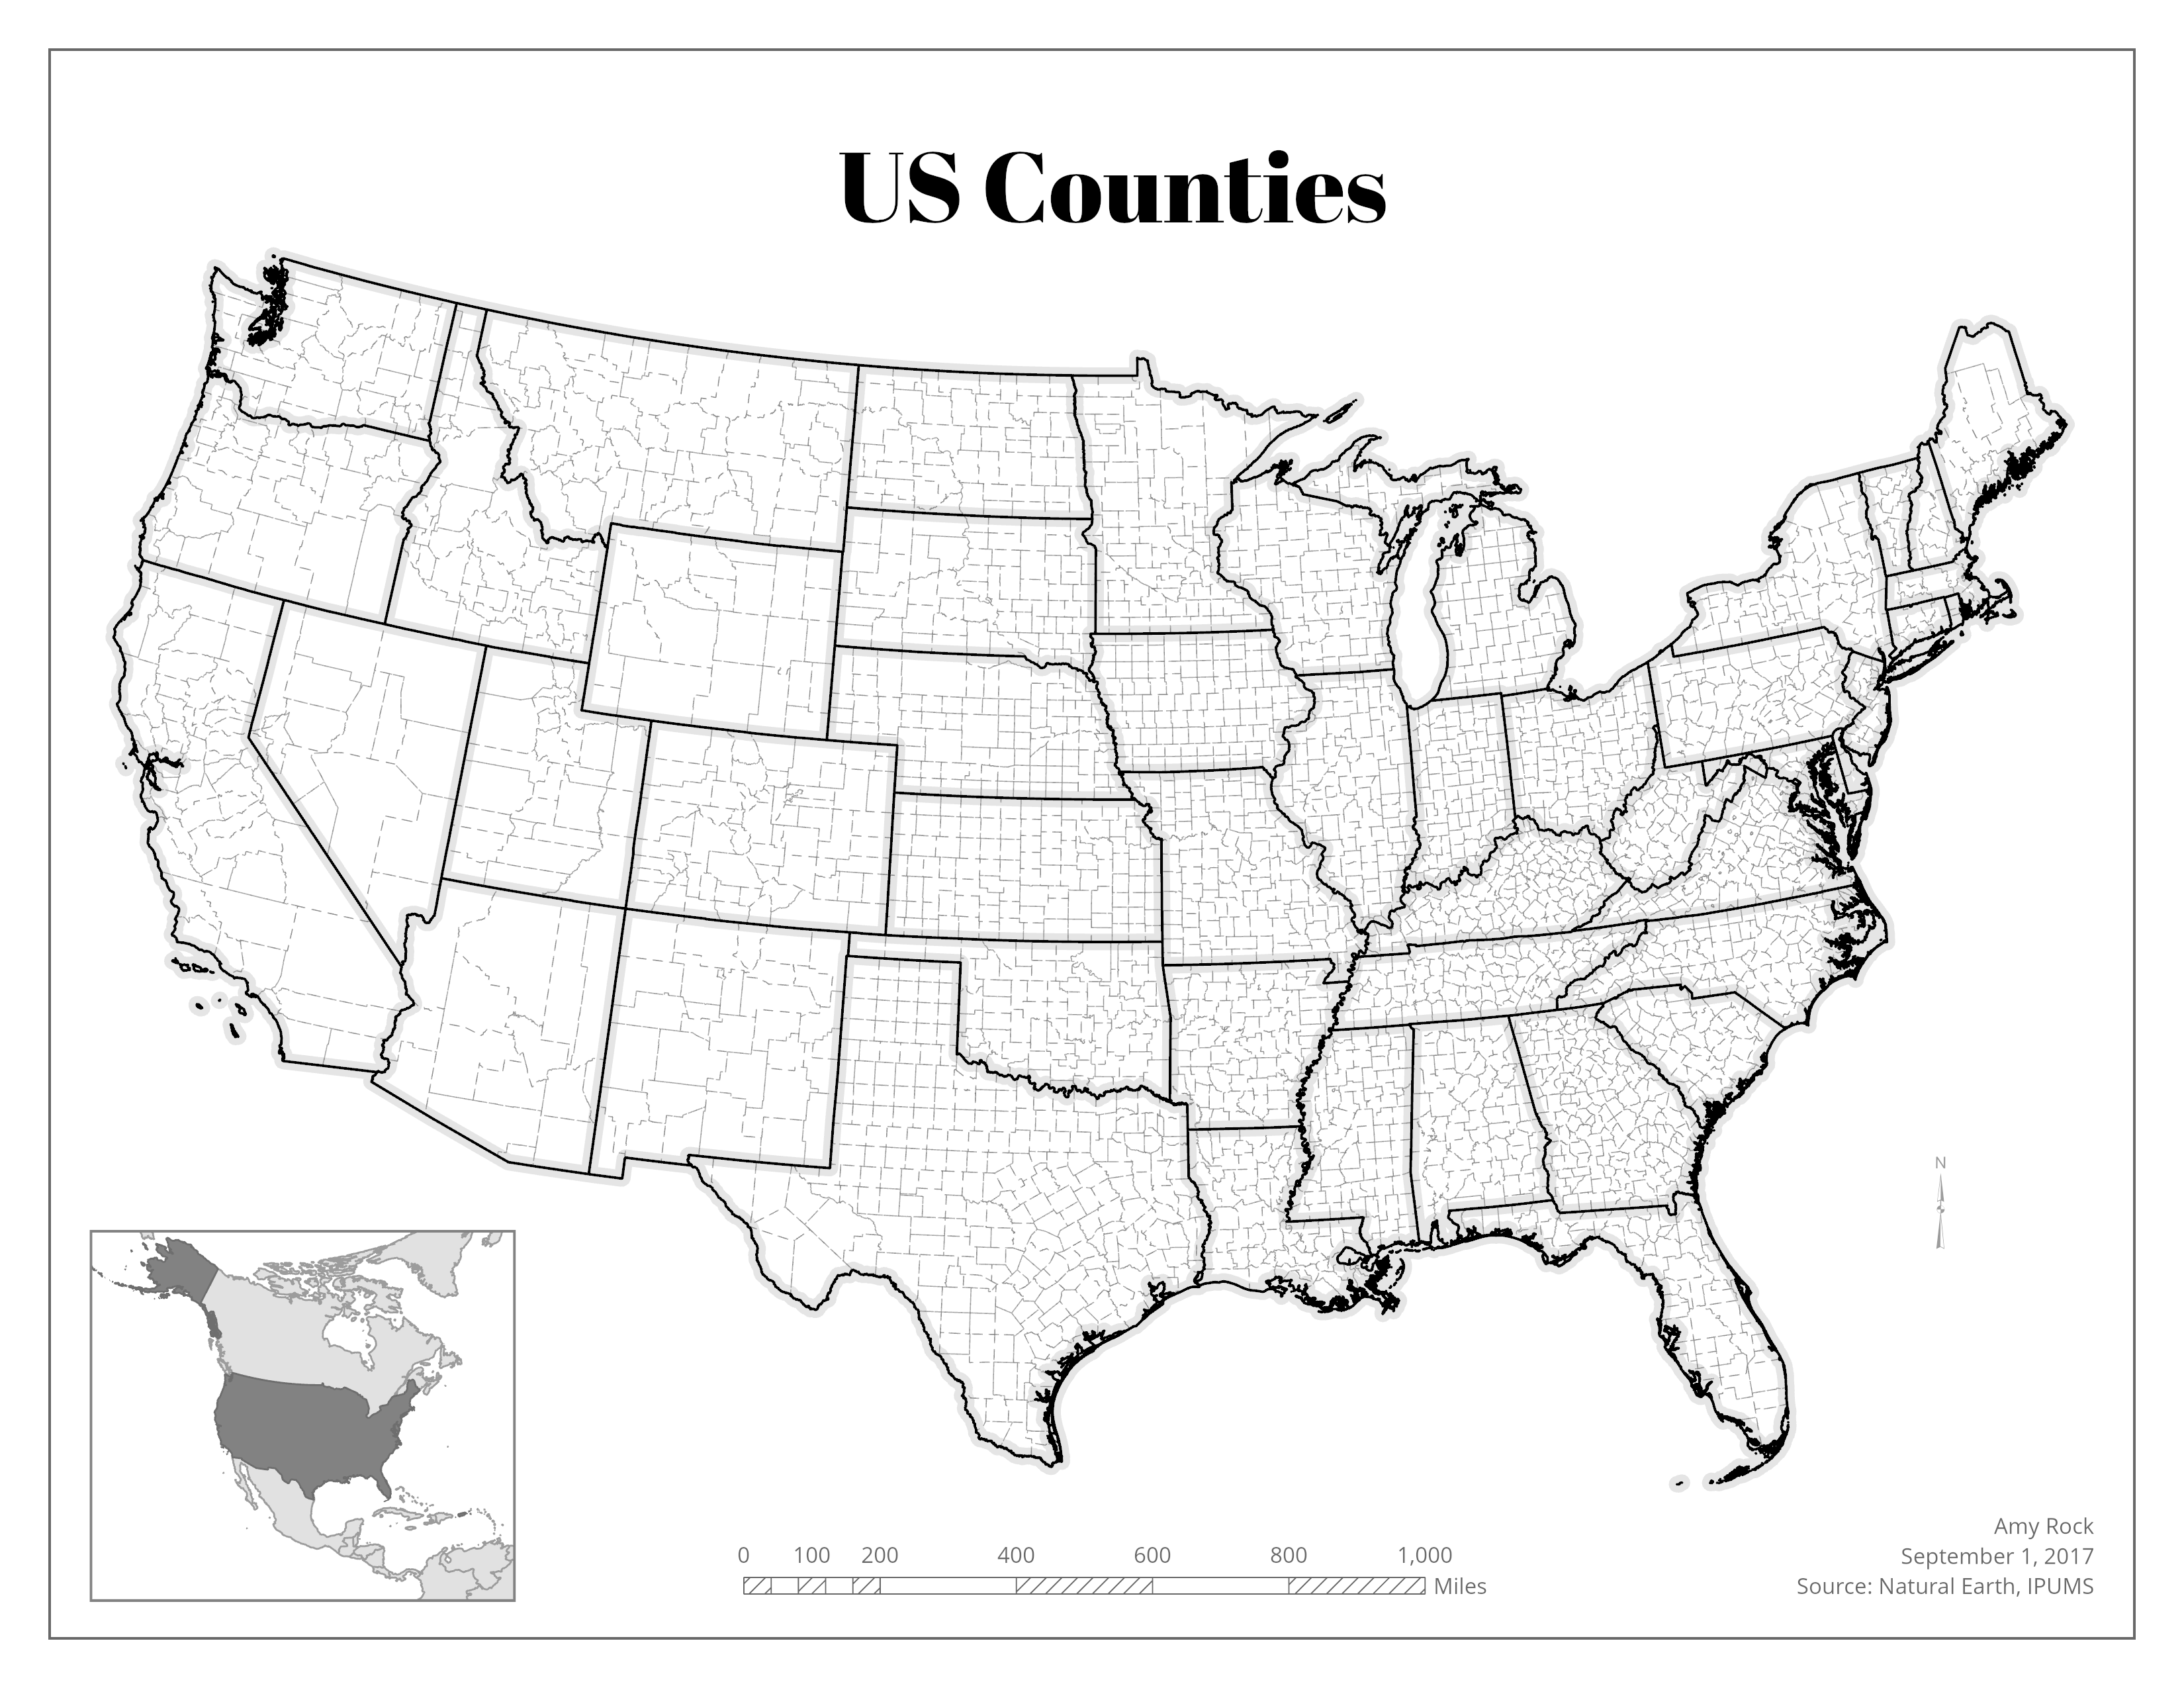 US Counties map reworked